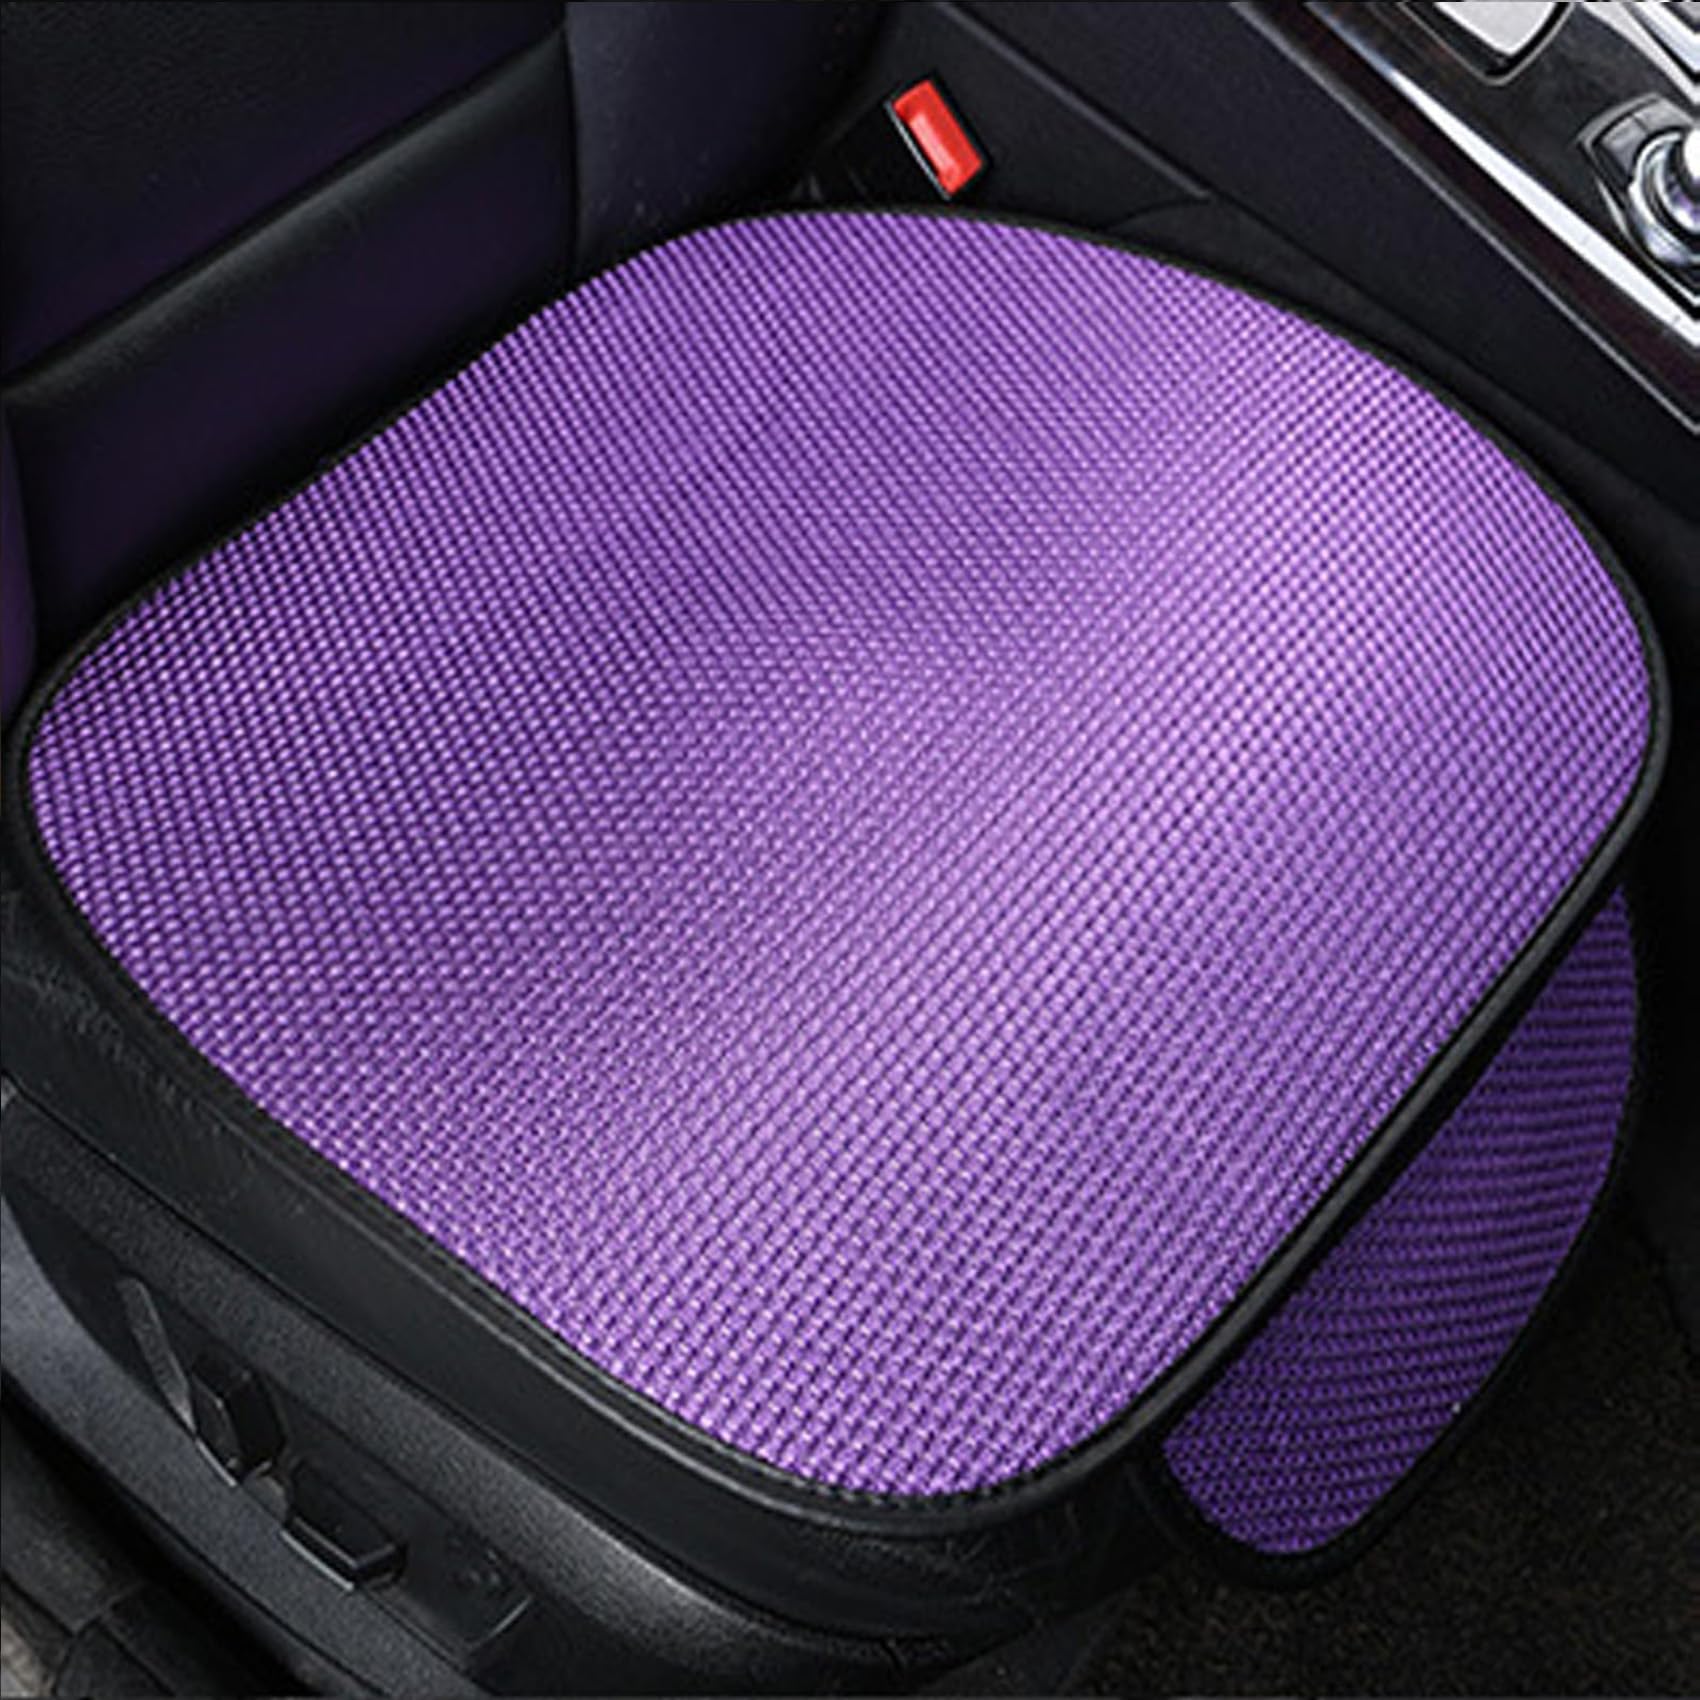 Non-slip Car Seat Pad for Summer Breathable and Refreshing, Breathable & Anti-Slip Cotton Car Seat Covers for Summer Heat, Universal Bottom Seat Covers for Cars of Front Seats (Purple,Front Seat) von YODAOLI